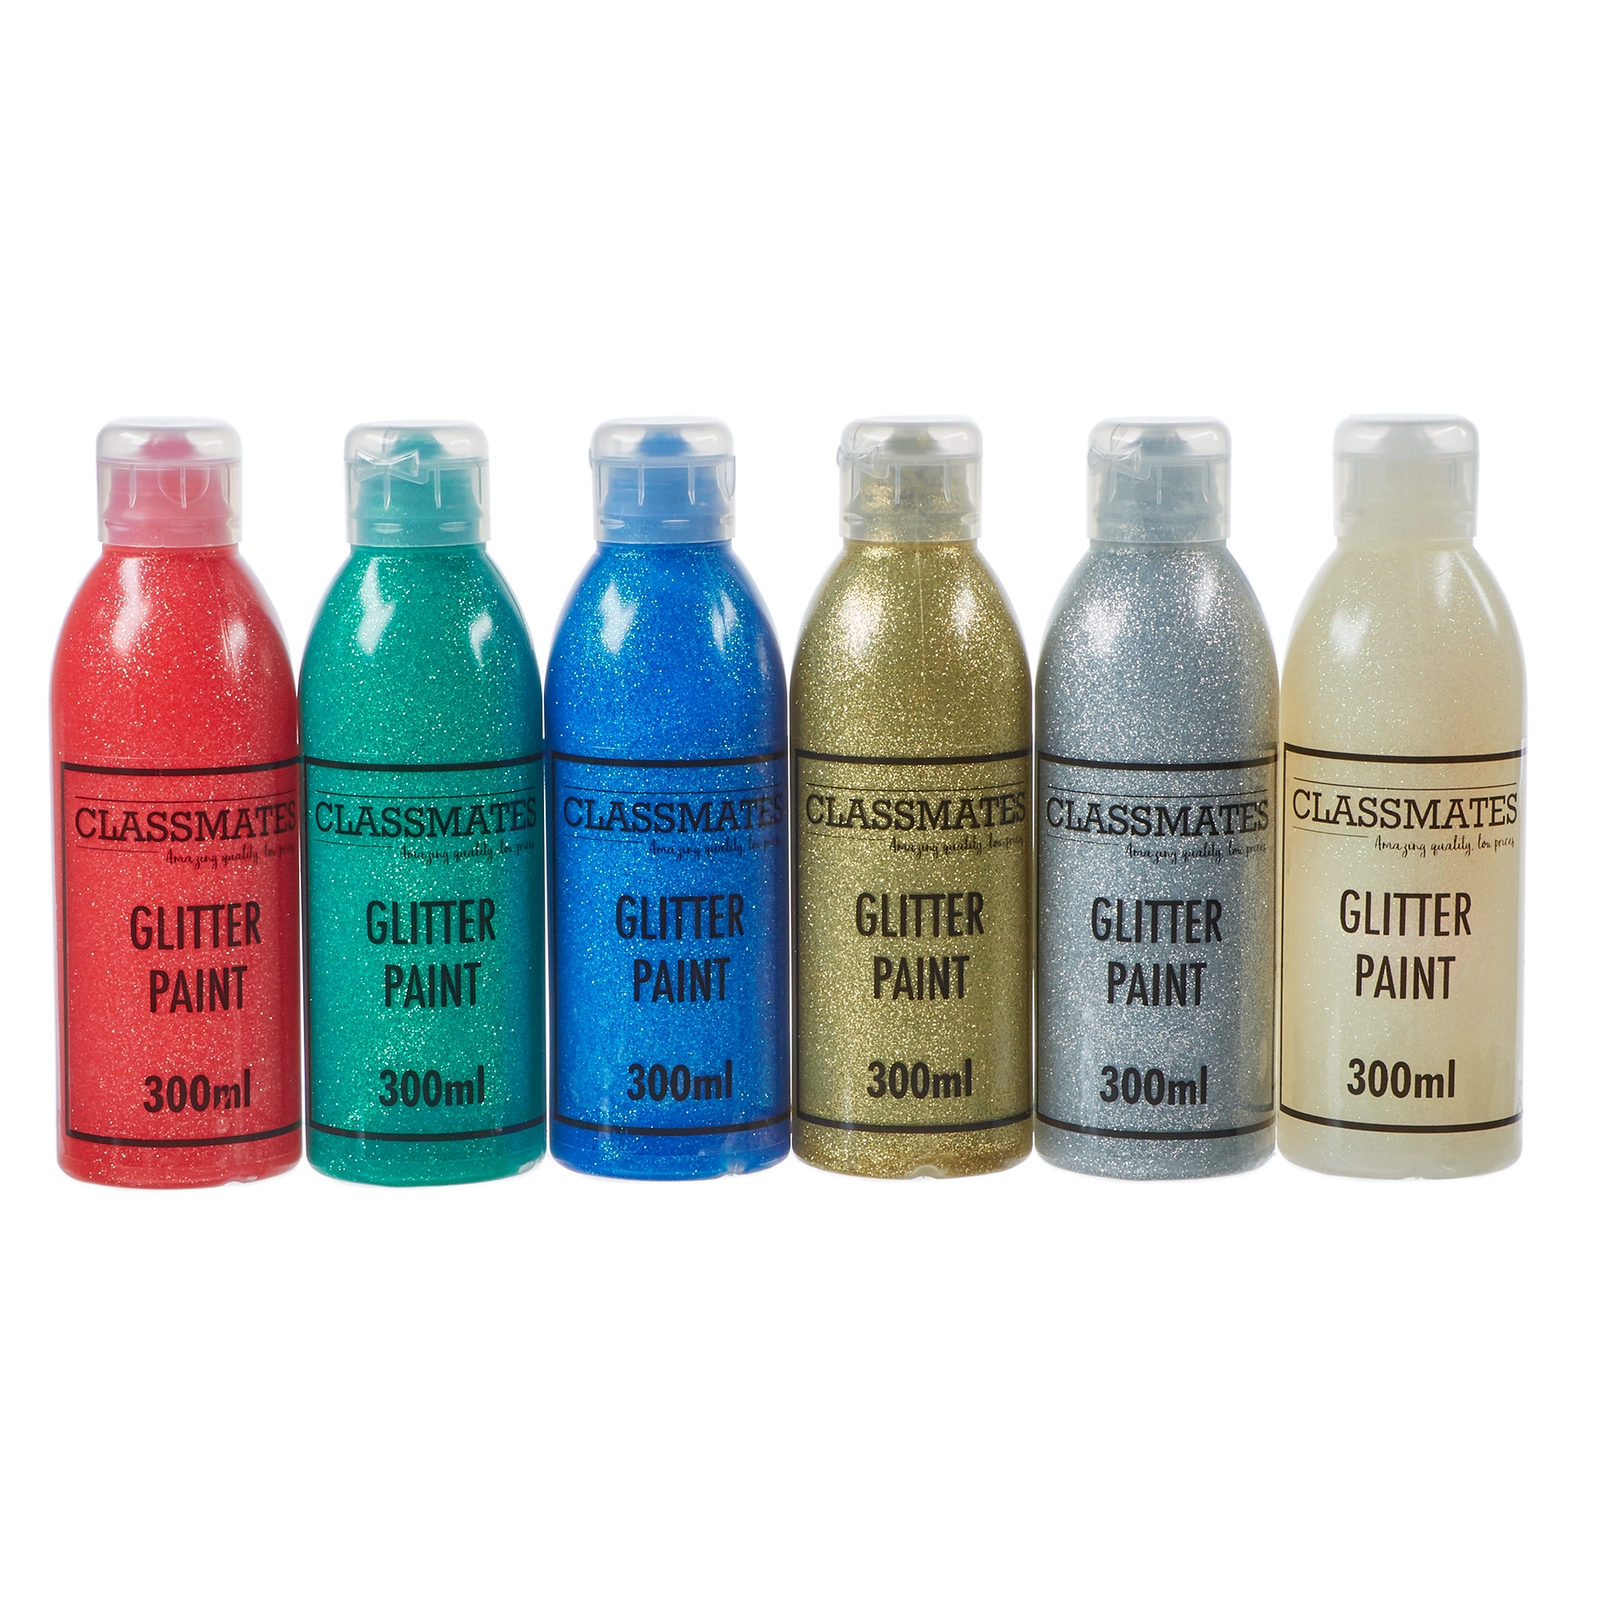 Classmates Glitter Ready Mixed Paint in Assorted - Pack of 6 - 300ml Bottle